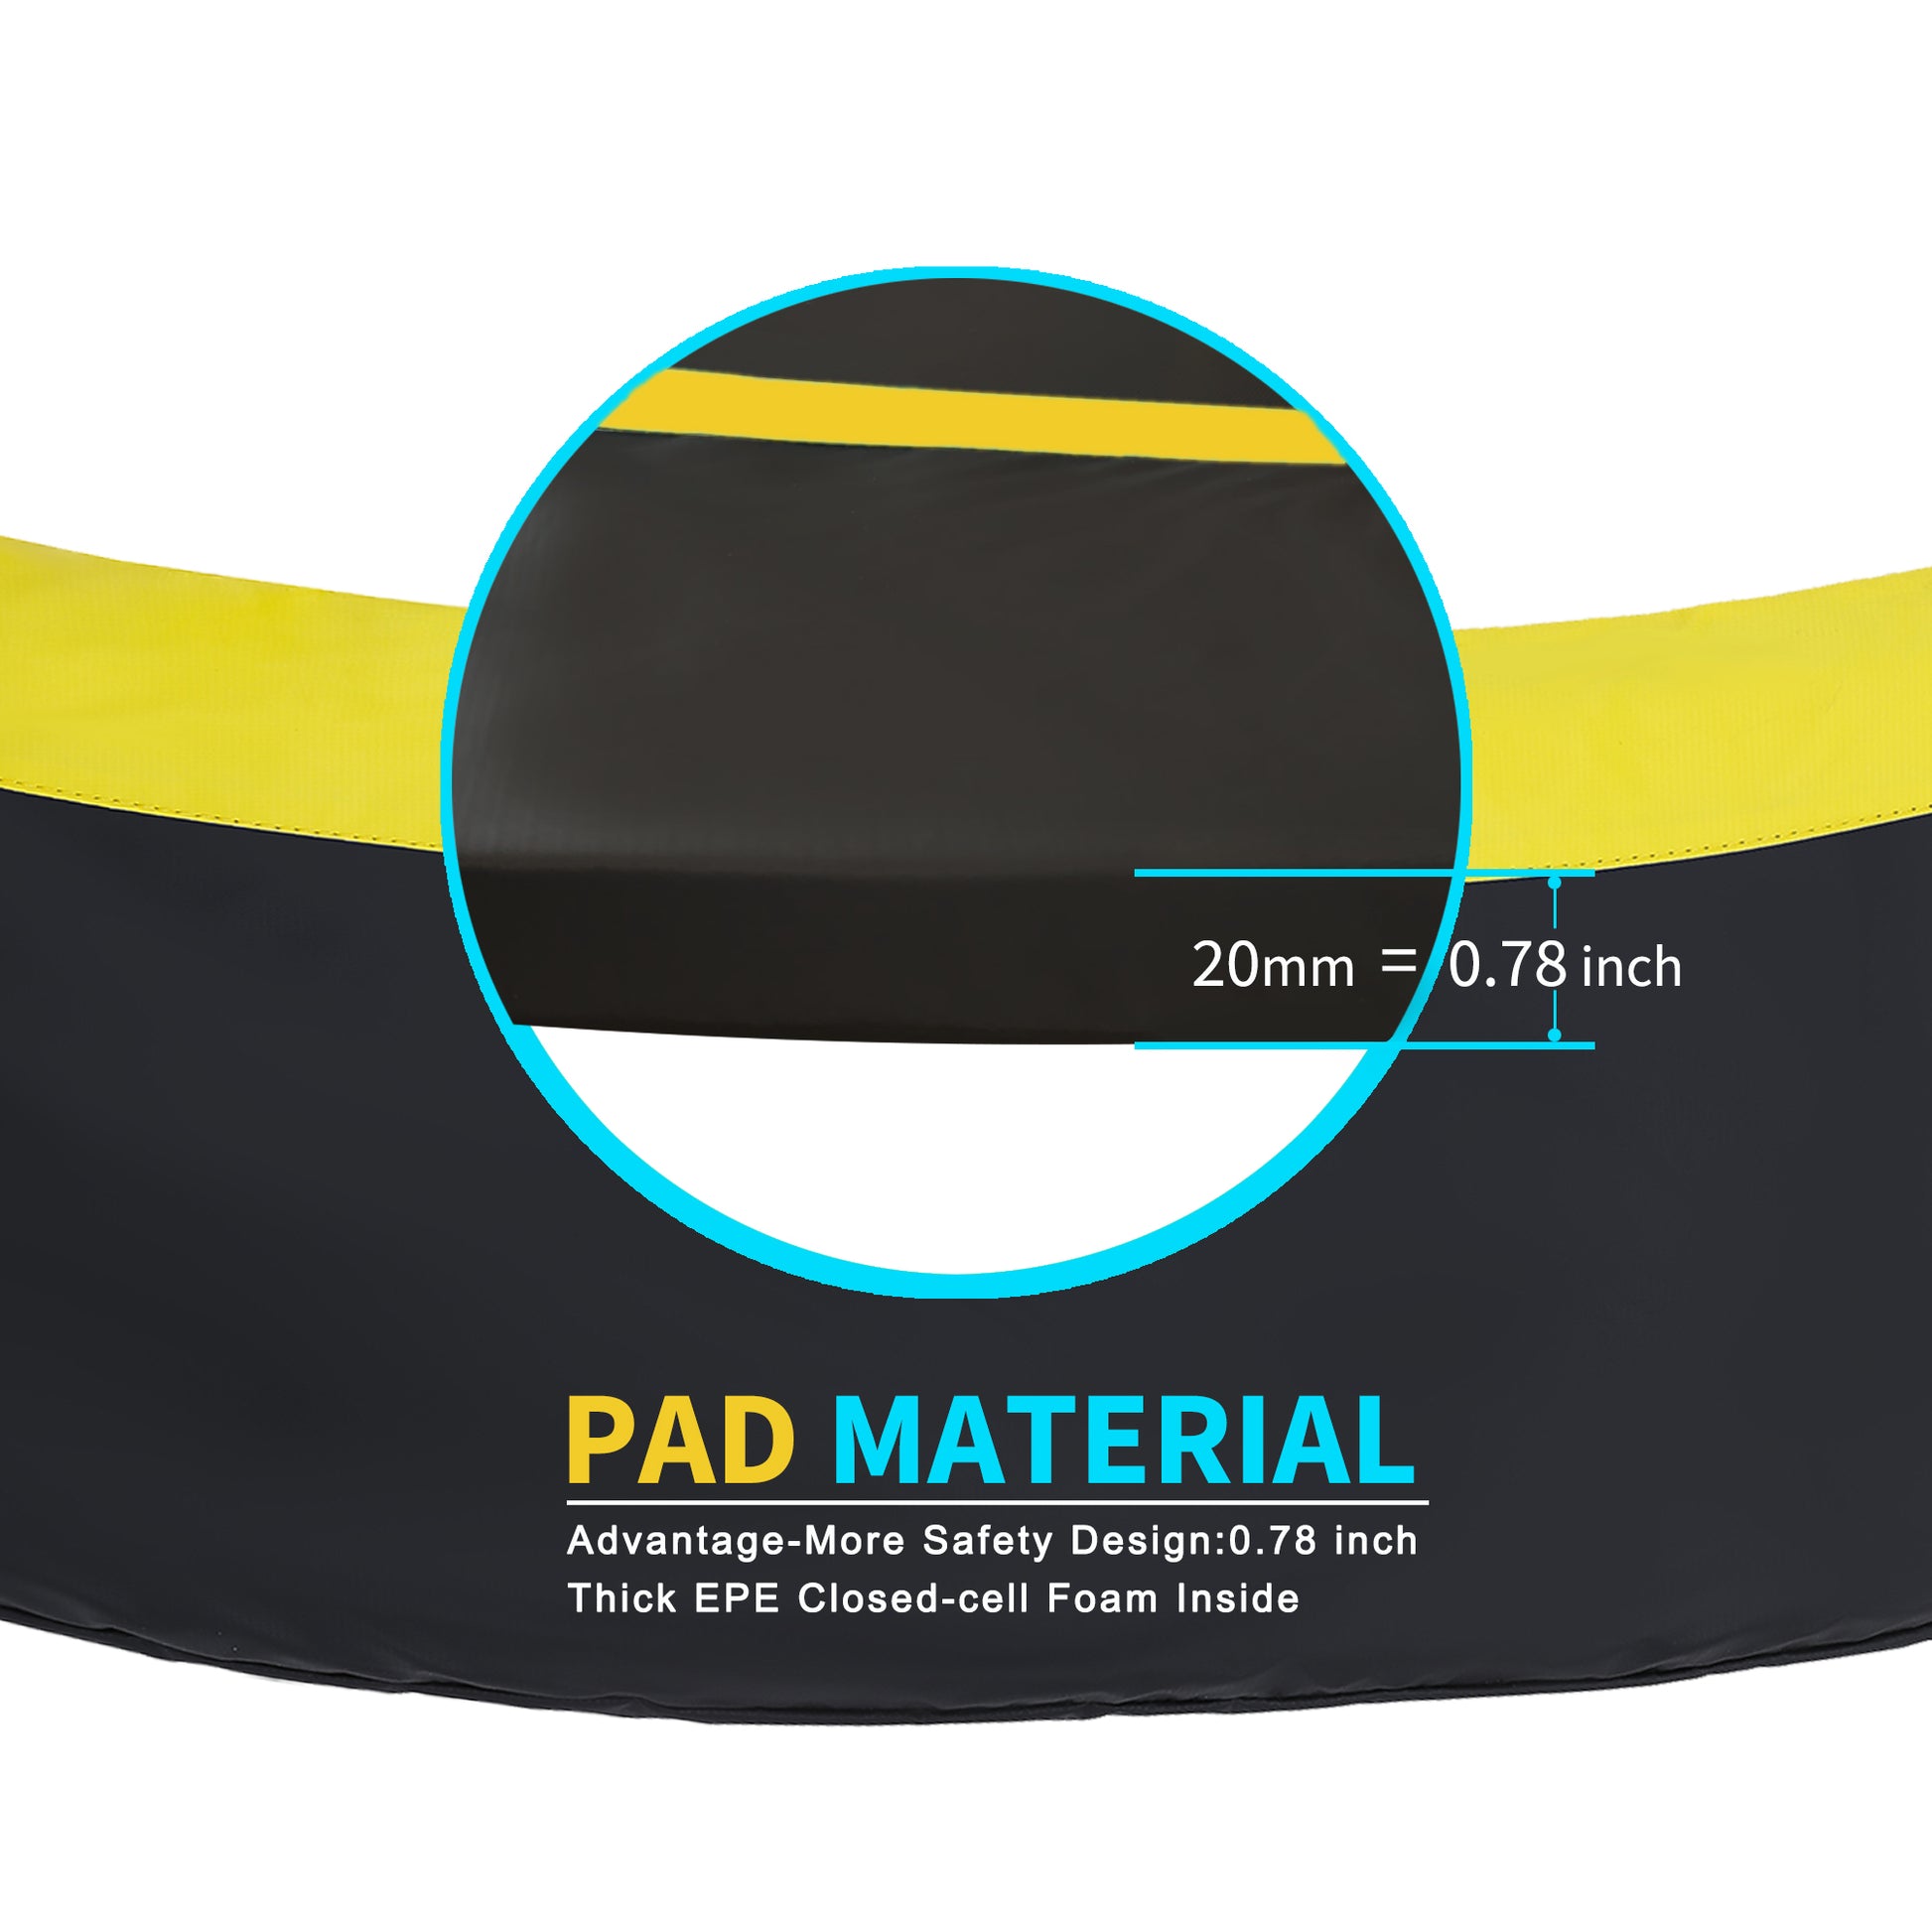 SkyBound Universal Replacement Trampoline Safety Pad - Extra Thick Foam Pad, Comfortable, Long Lasting, and Water-Resistant - Black/Yellow Color - 12ft